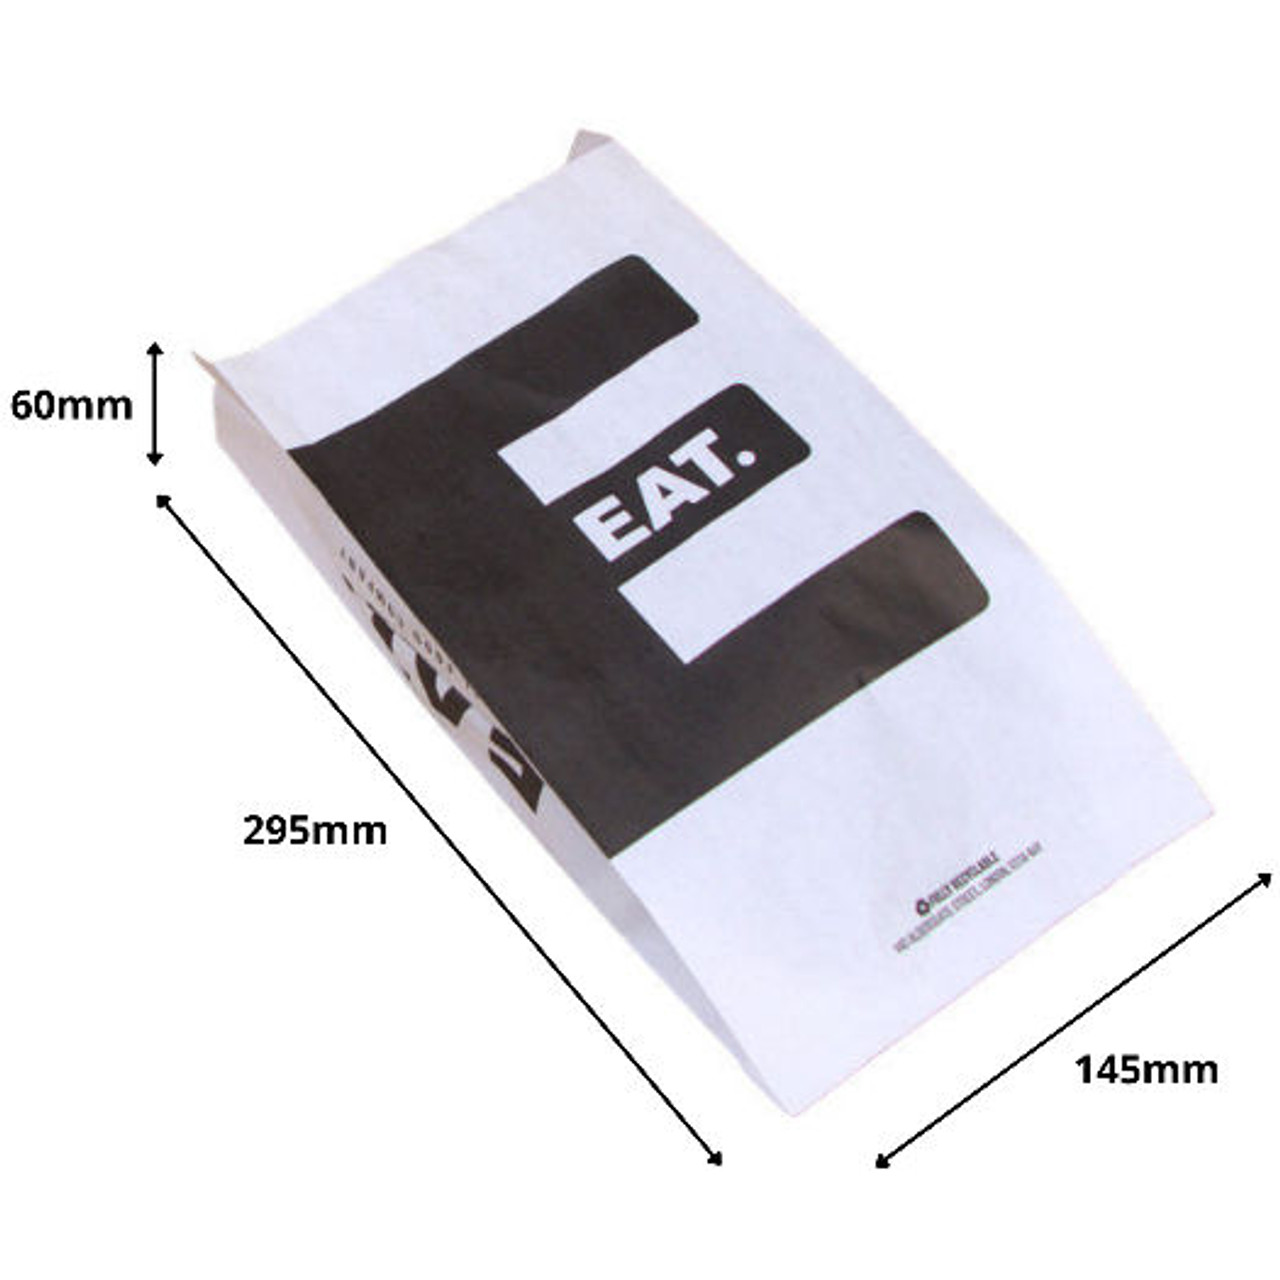 1,000 - 6"x 8.5"x 11.5" white grease resistant paper bags Printed EAT